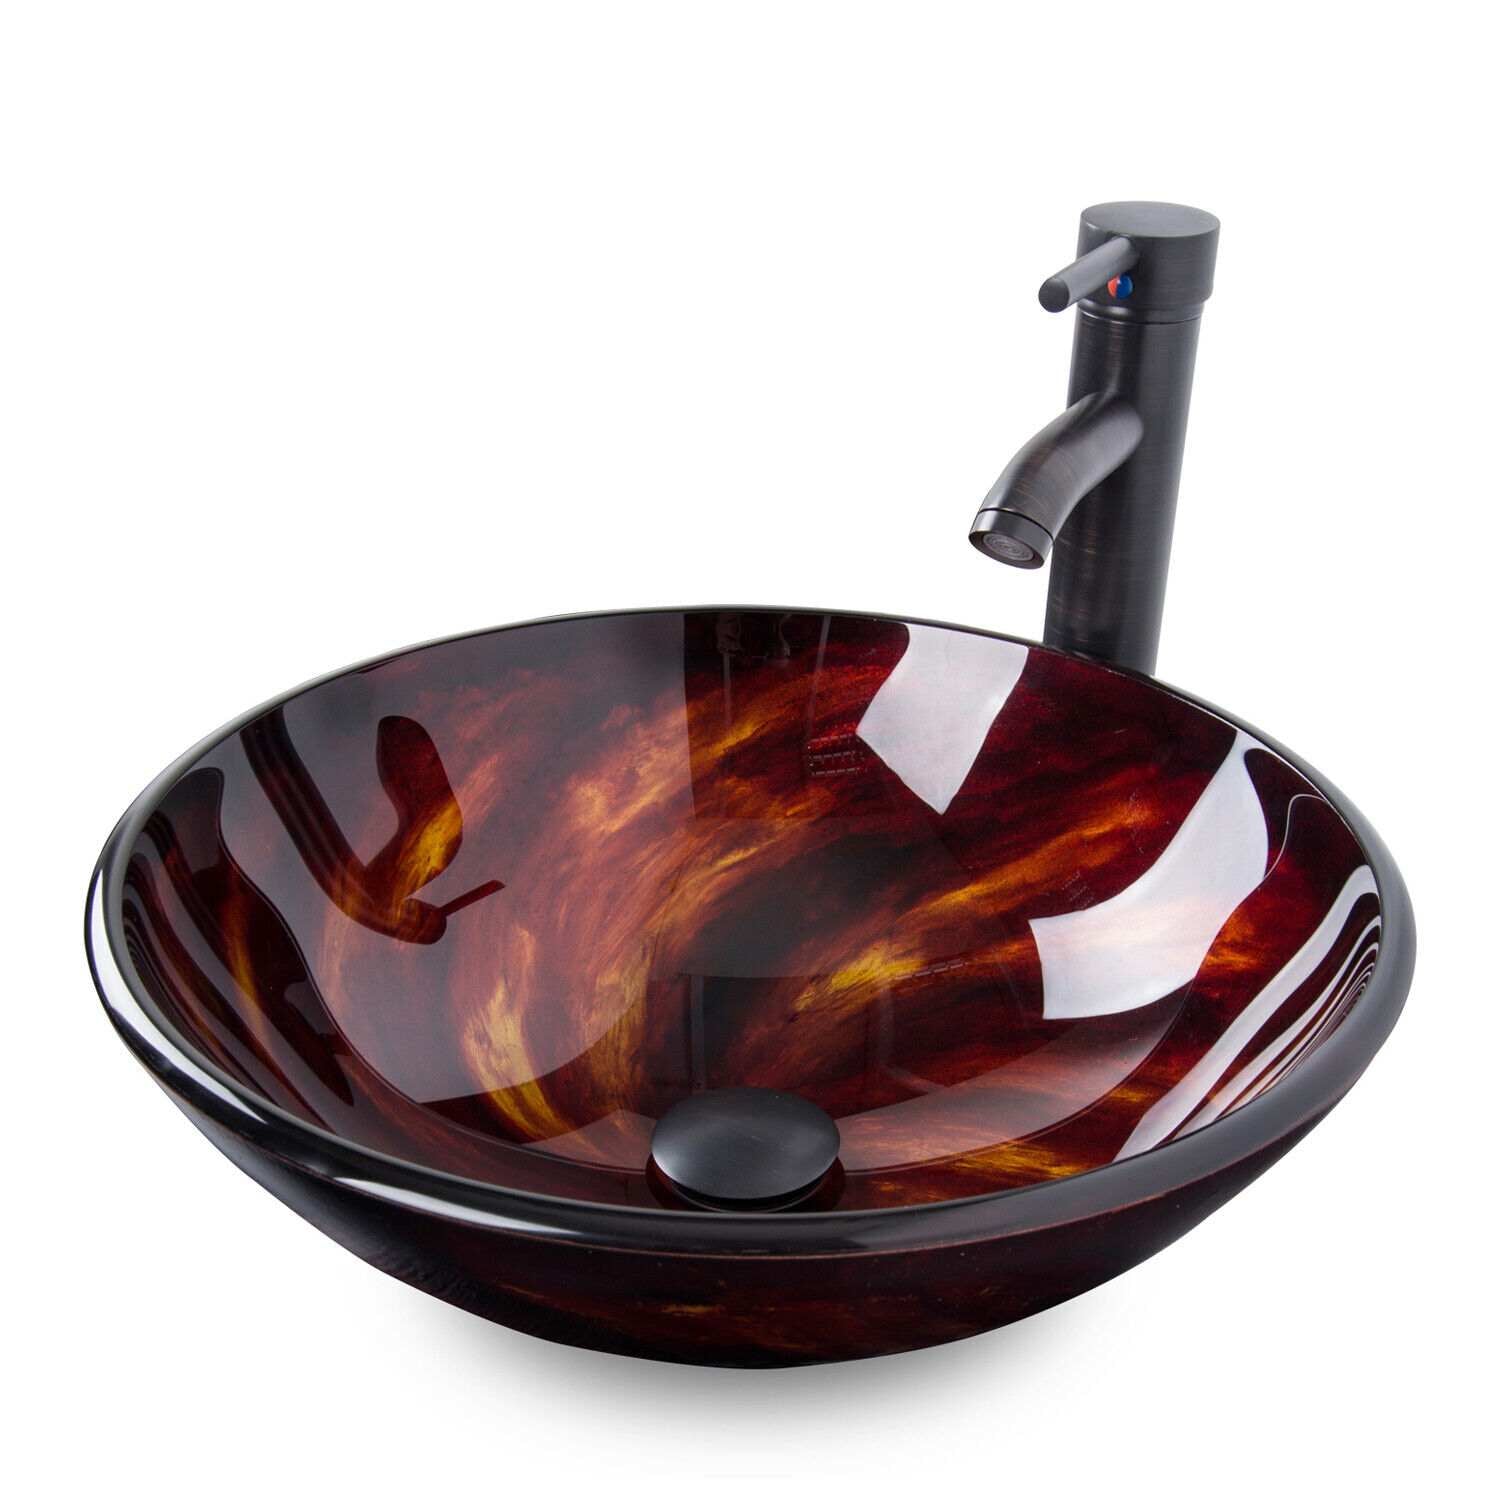 Elecwish Red Flame Sink